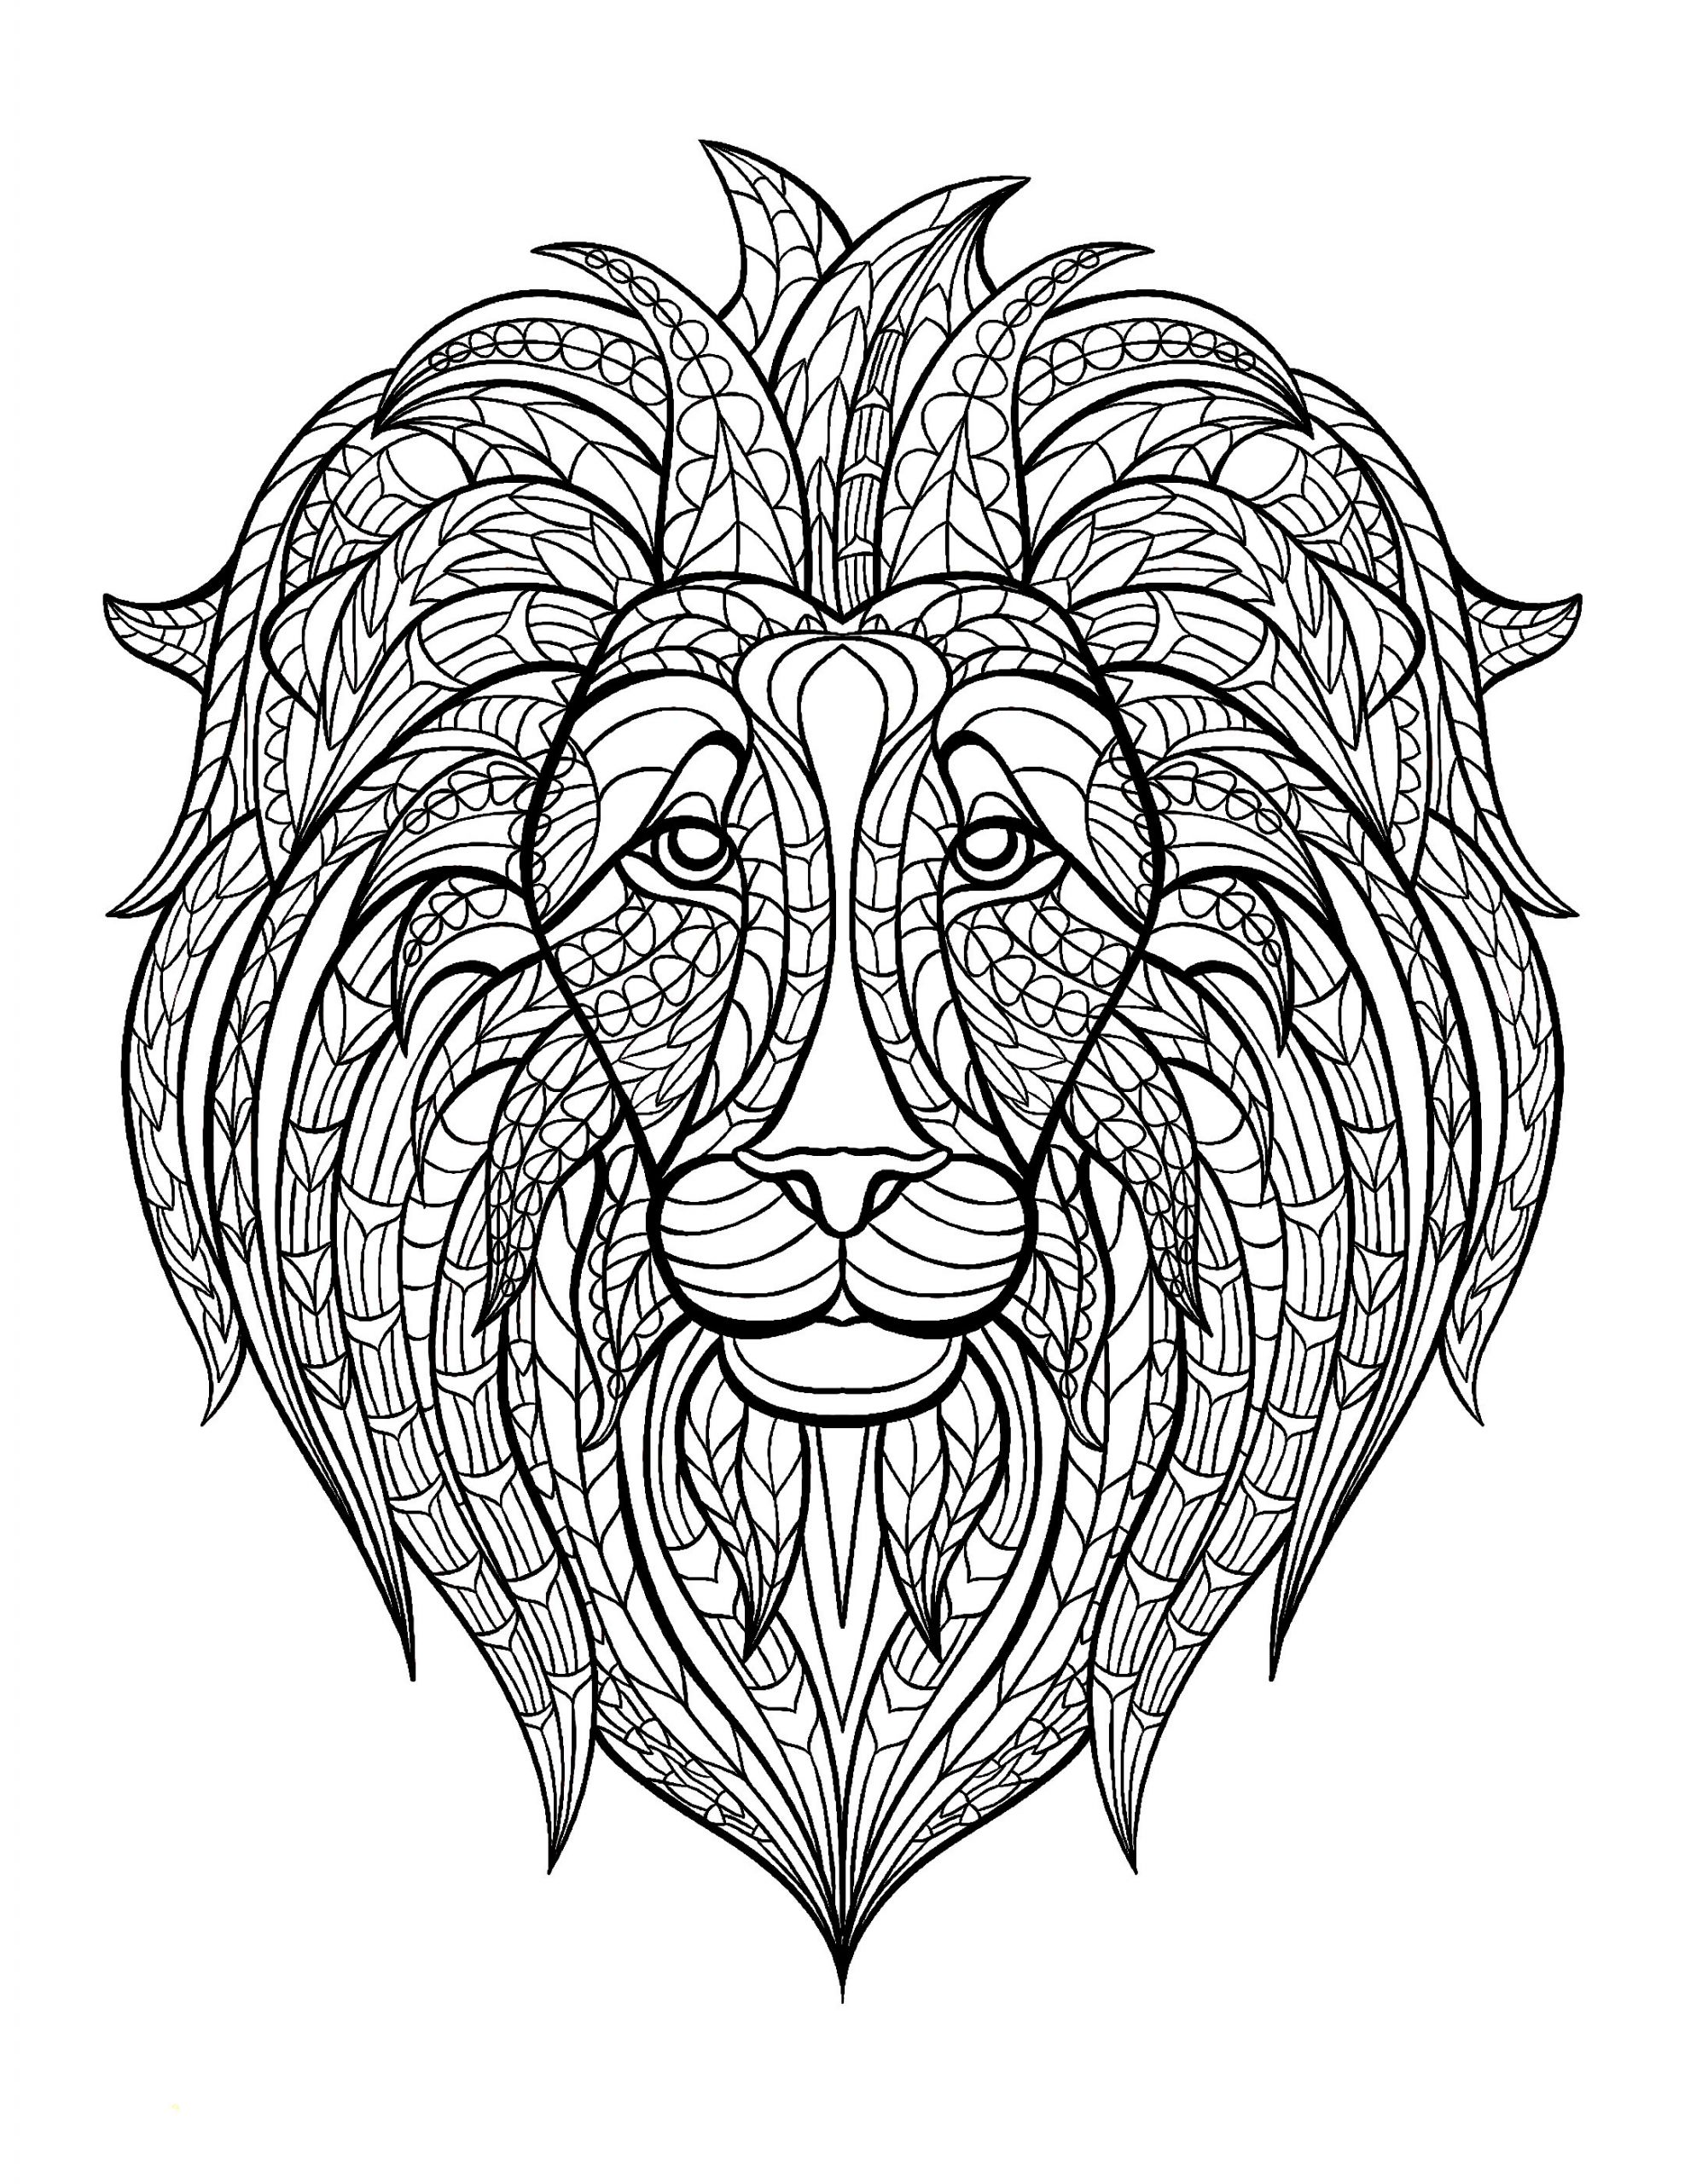 Lion Coloring Pages For Adults
 Animal Adult Coloring Book Giveaway on Natural Blaze